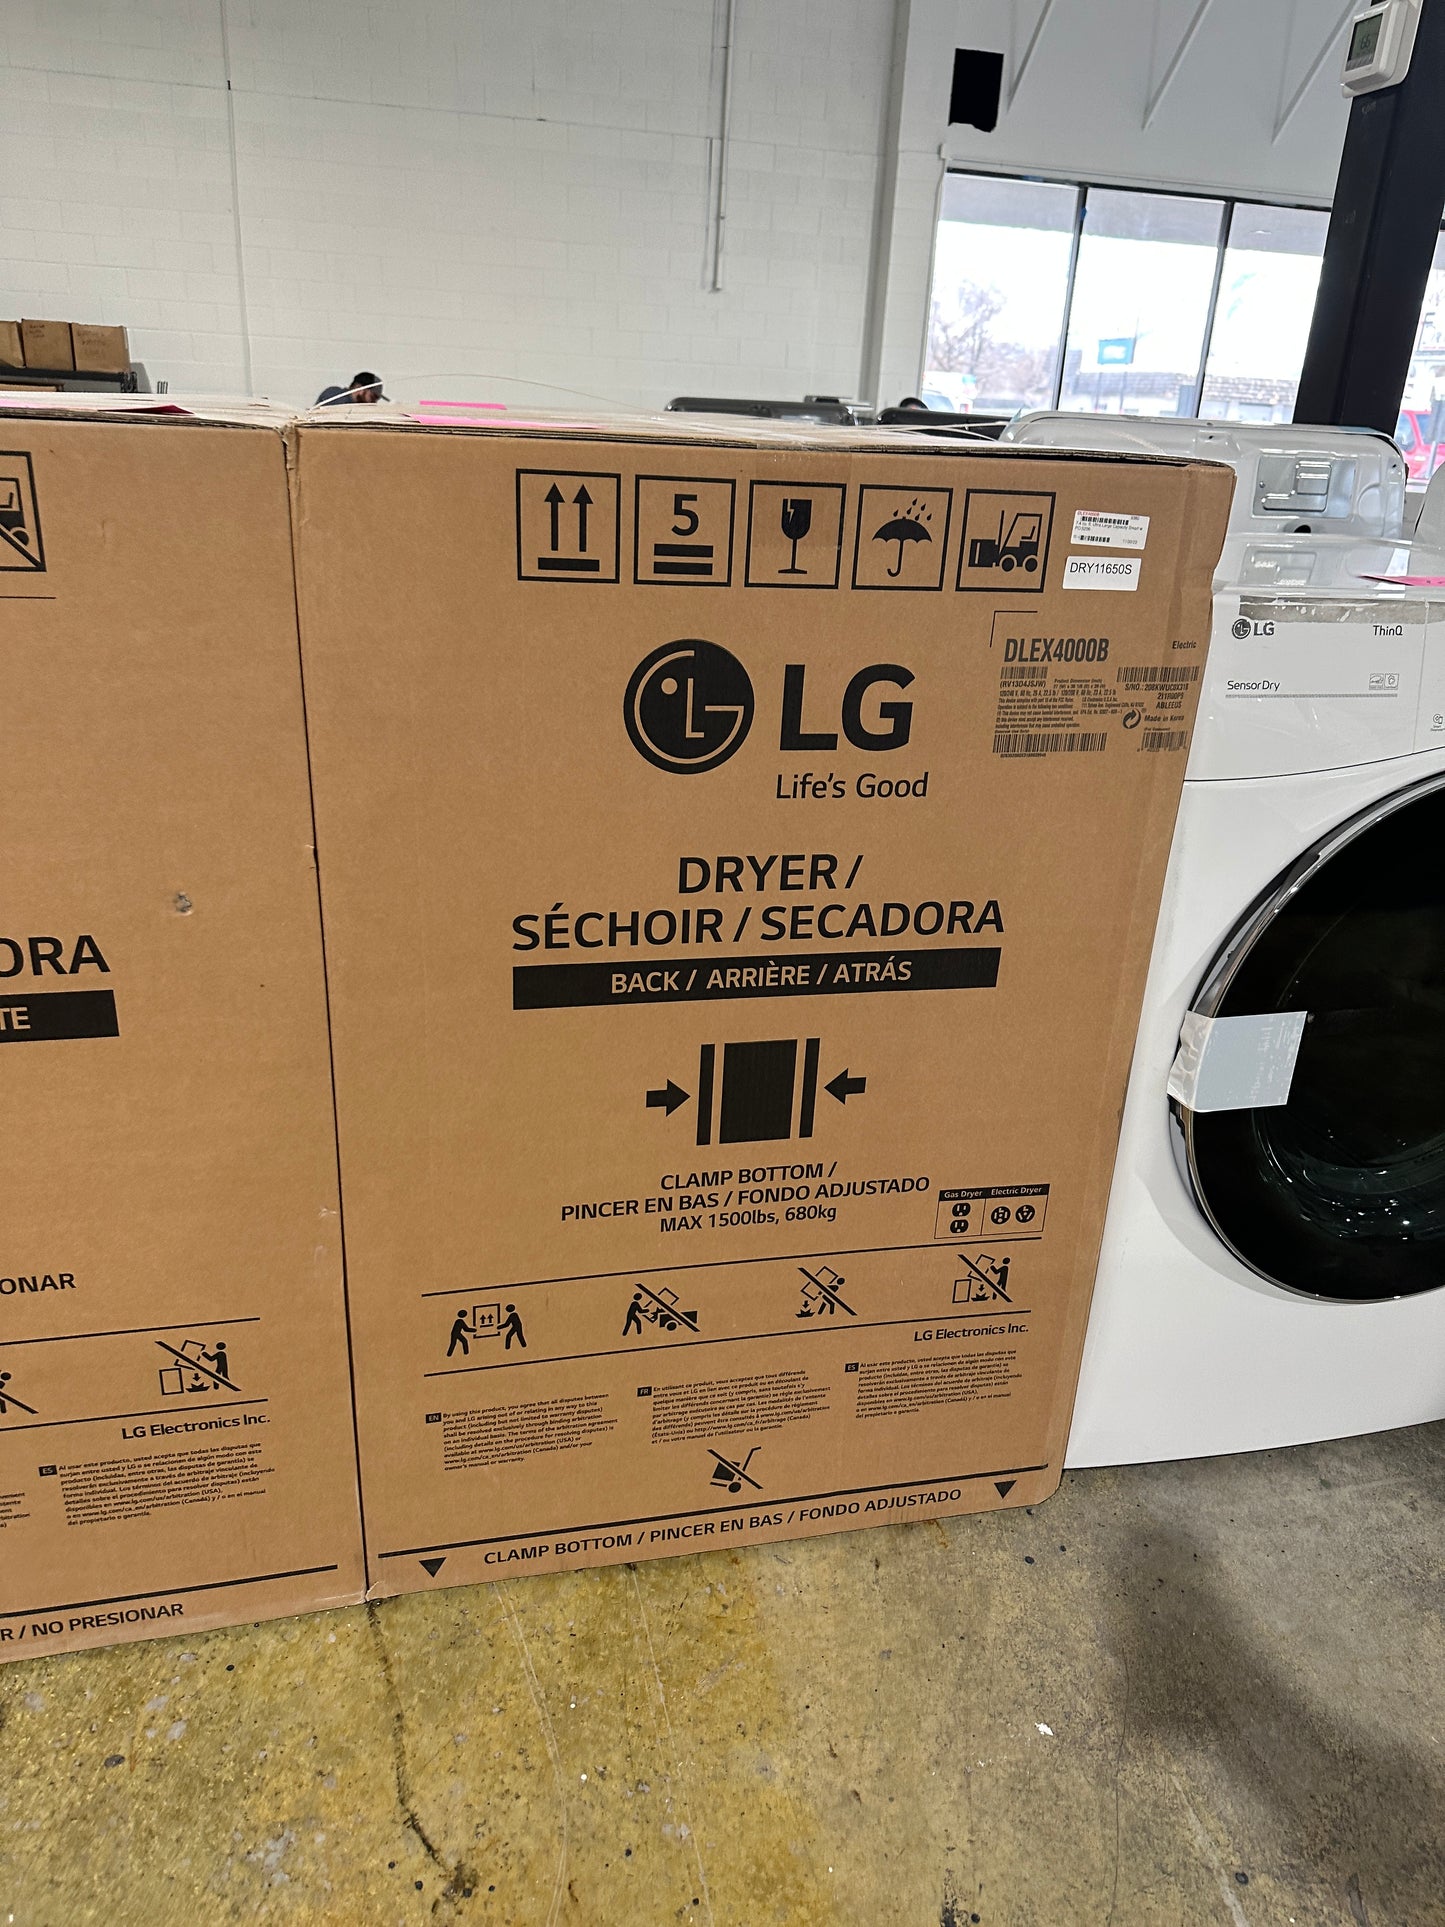 NEW ELECTRIC DRYER with FULL LG WARRANTY - DRY11650S DLEX4000B